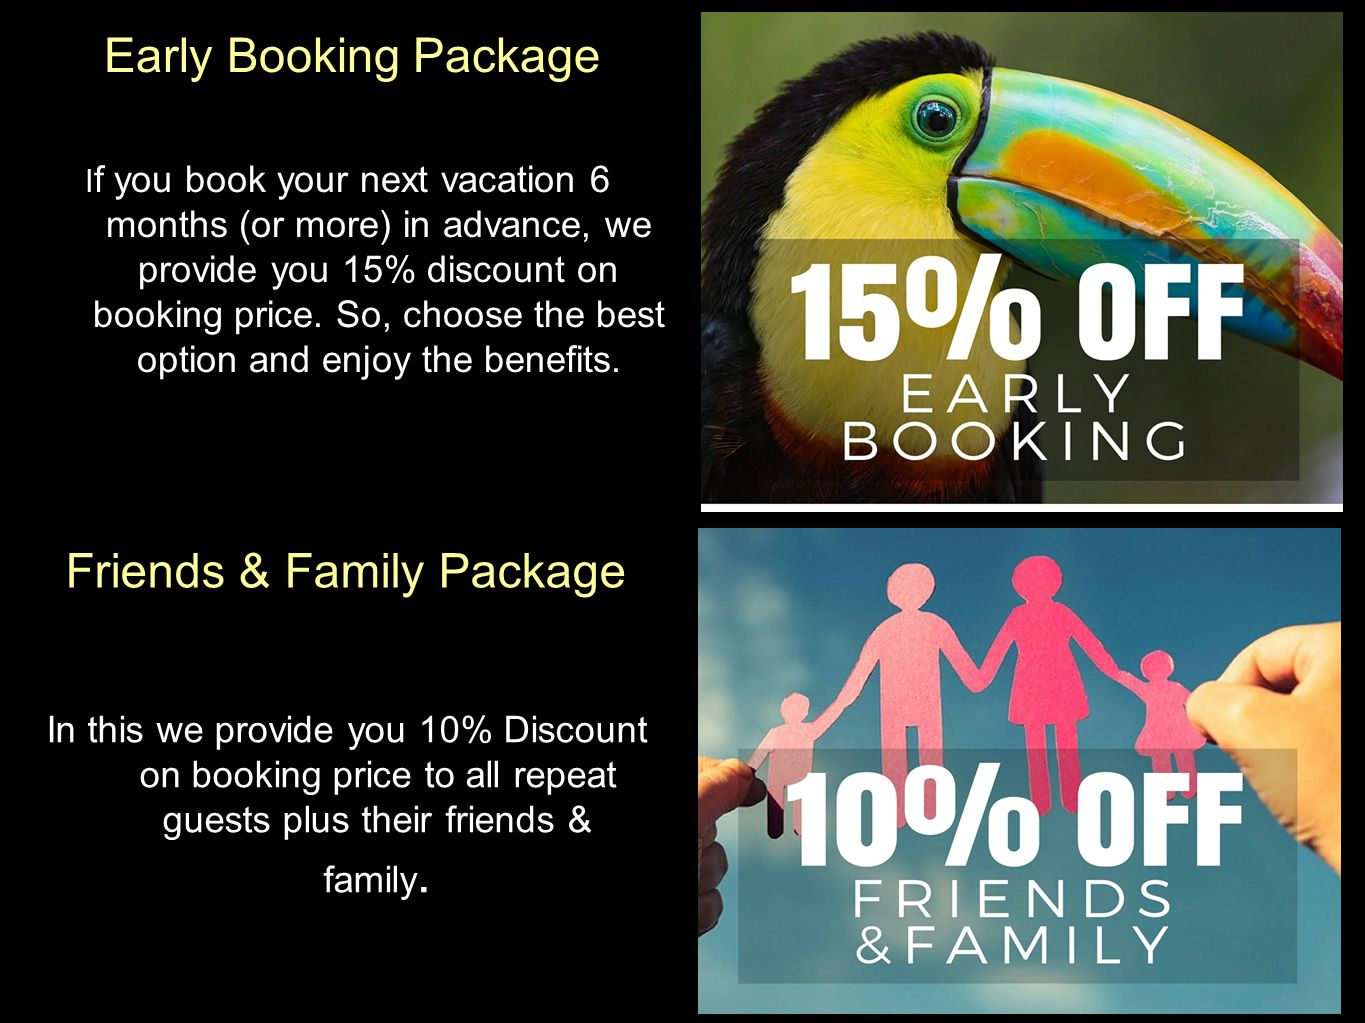 Early Booking Package I f you book your next vacation 6 months (or more) in advance, we provide you 15% discount on booking price.